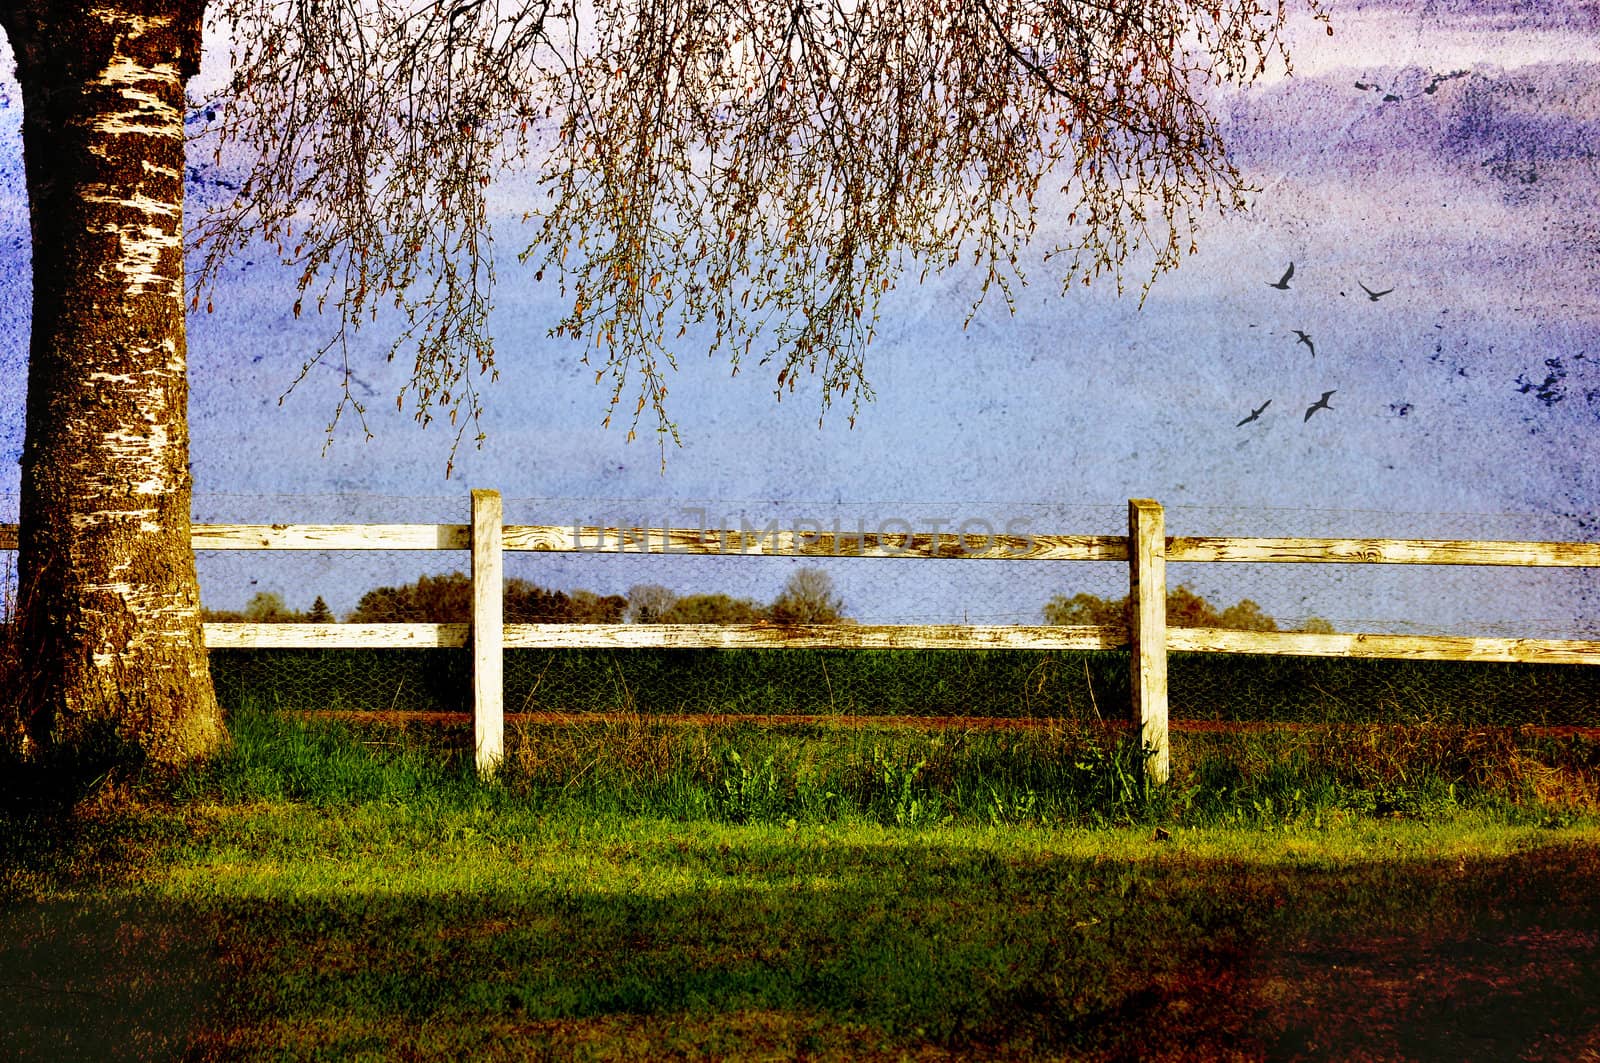 Textured rural scene with white fence and birch.